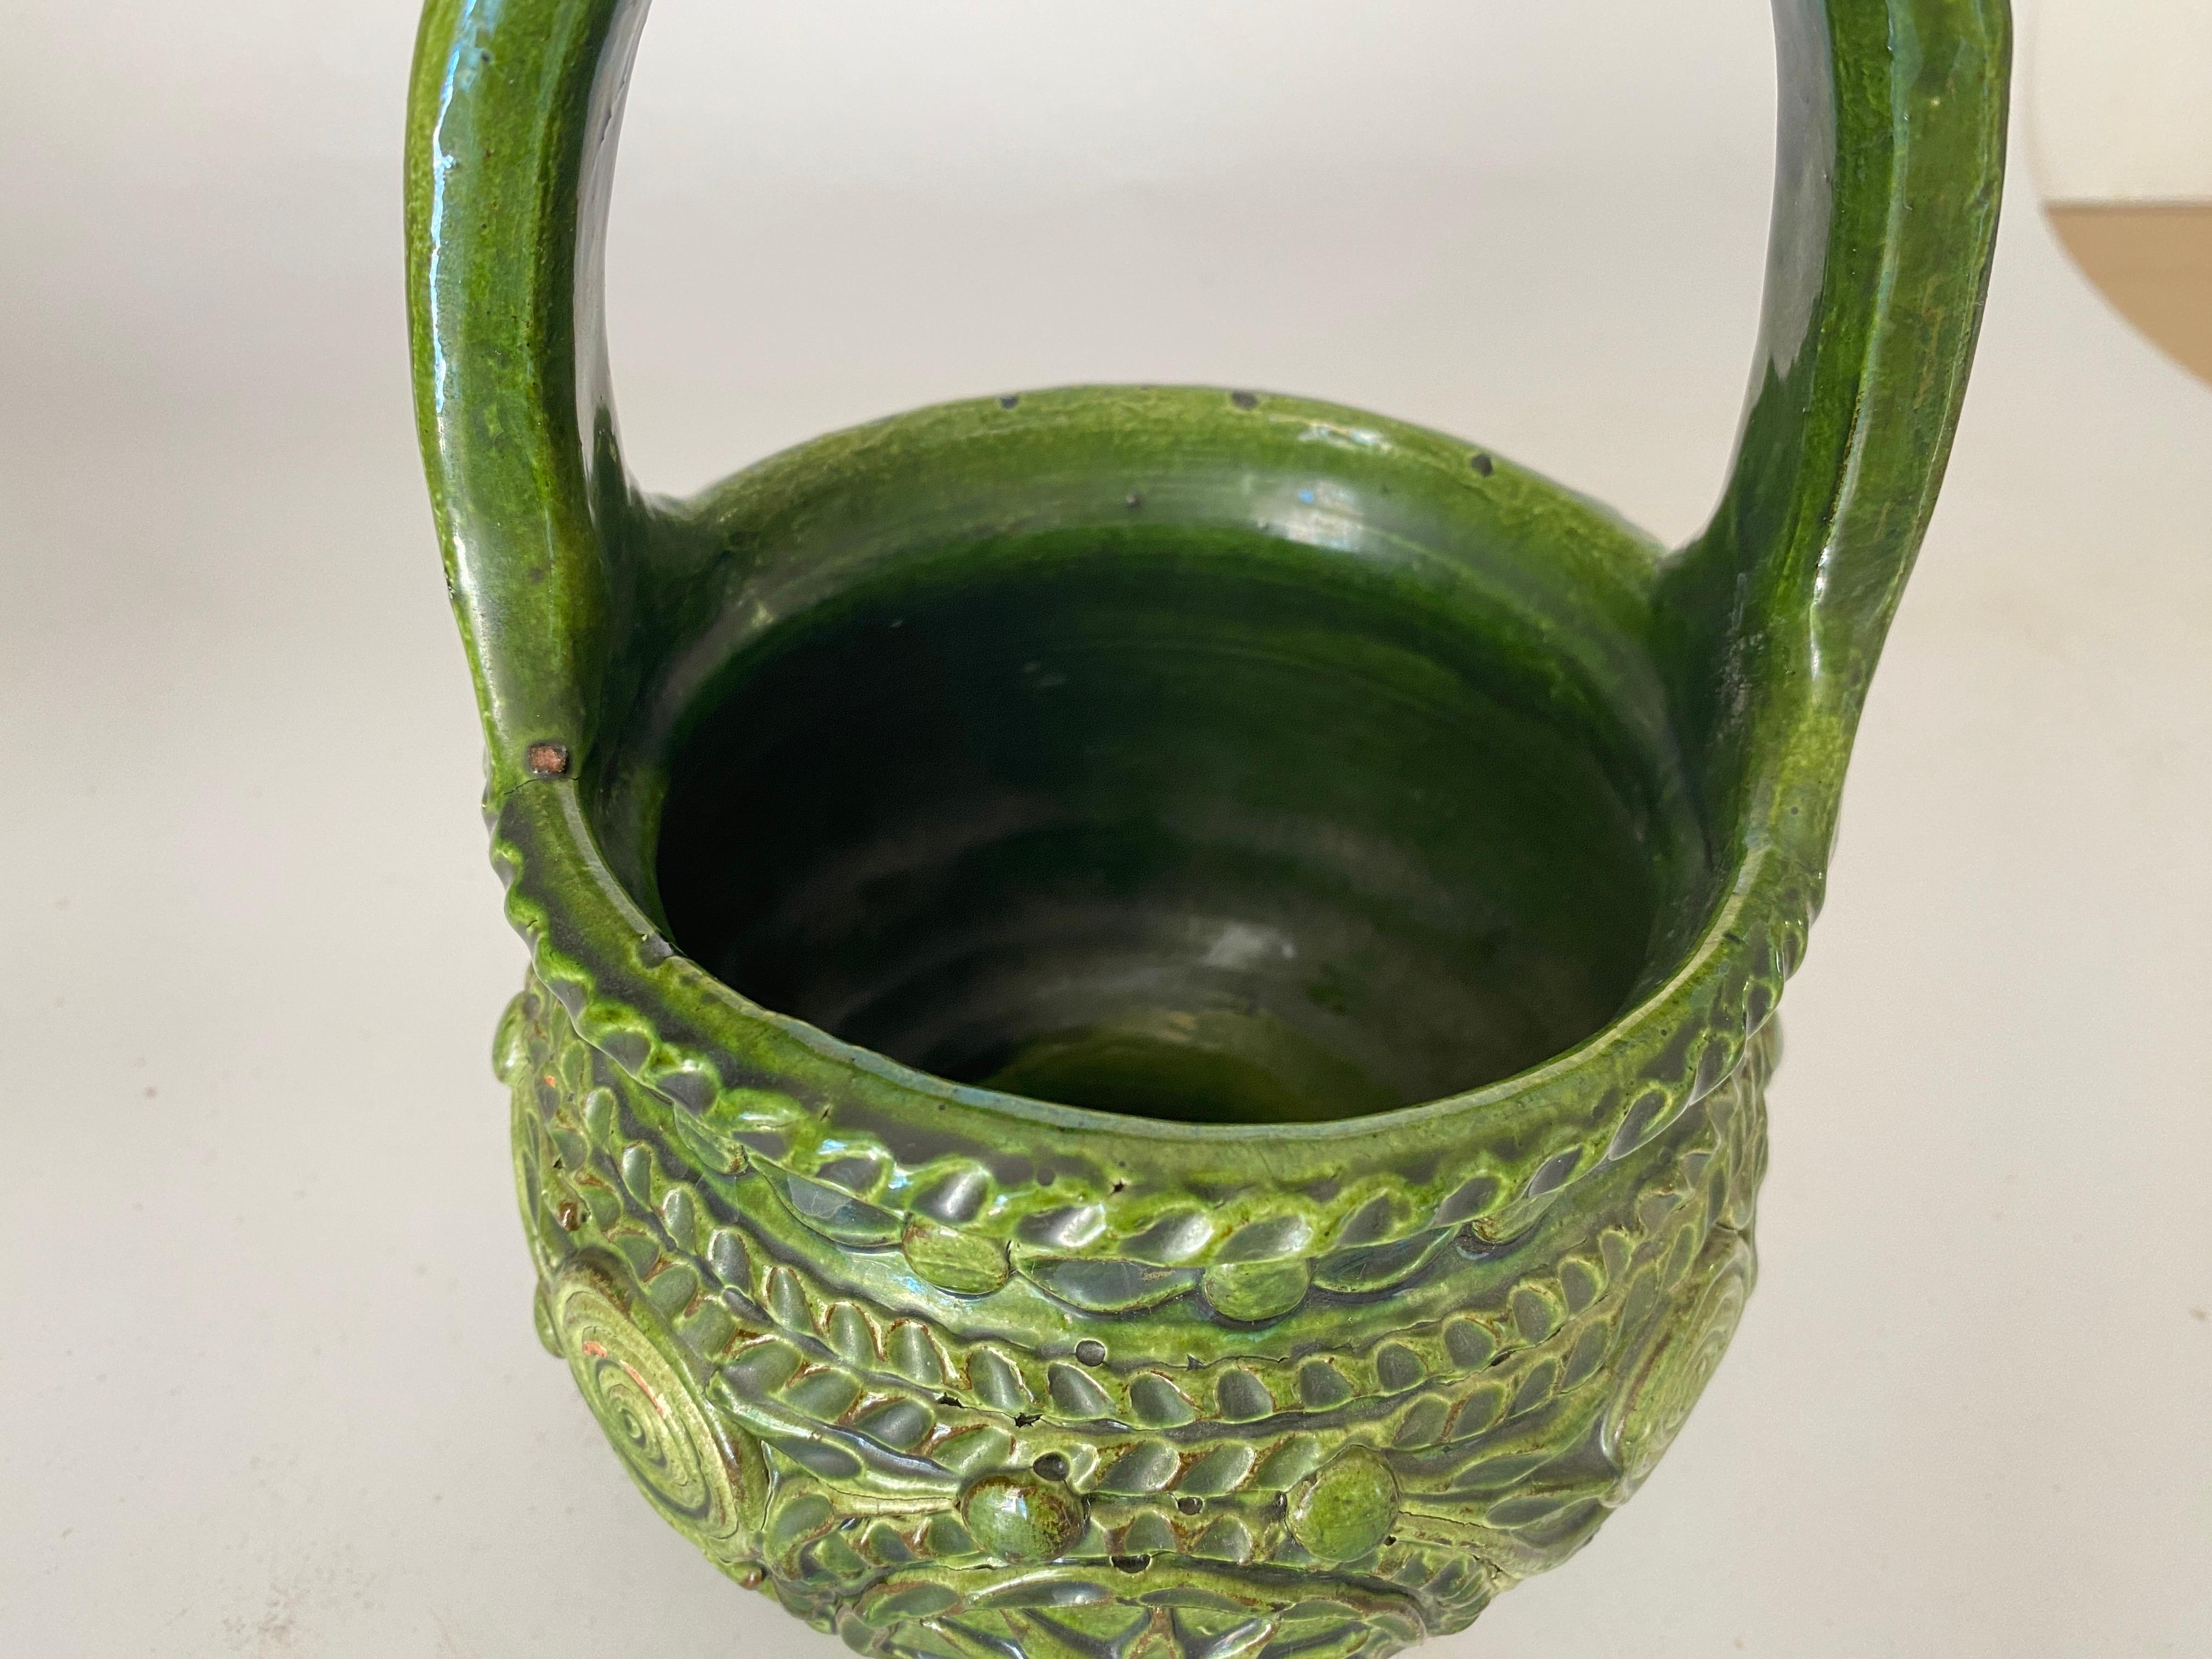 Kitchen box, Pot in Majolica. Vegetal Decor pattern. Green color.
It has been made in France circa 19th century.
